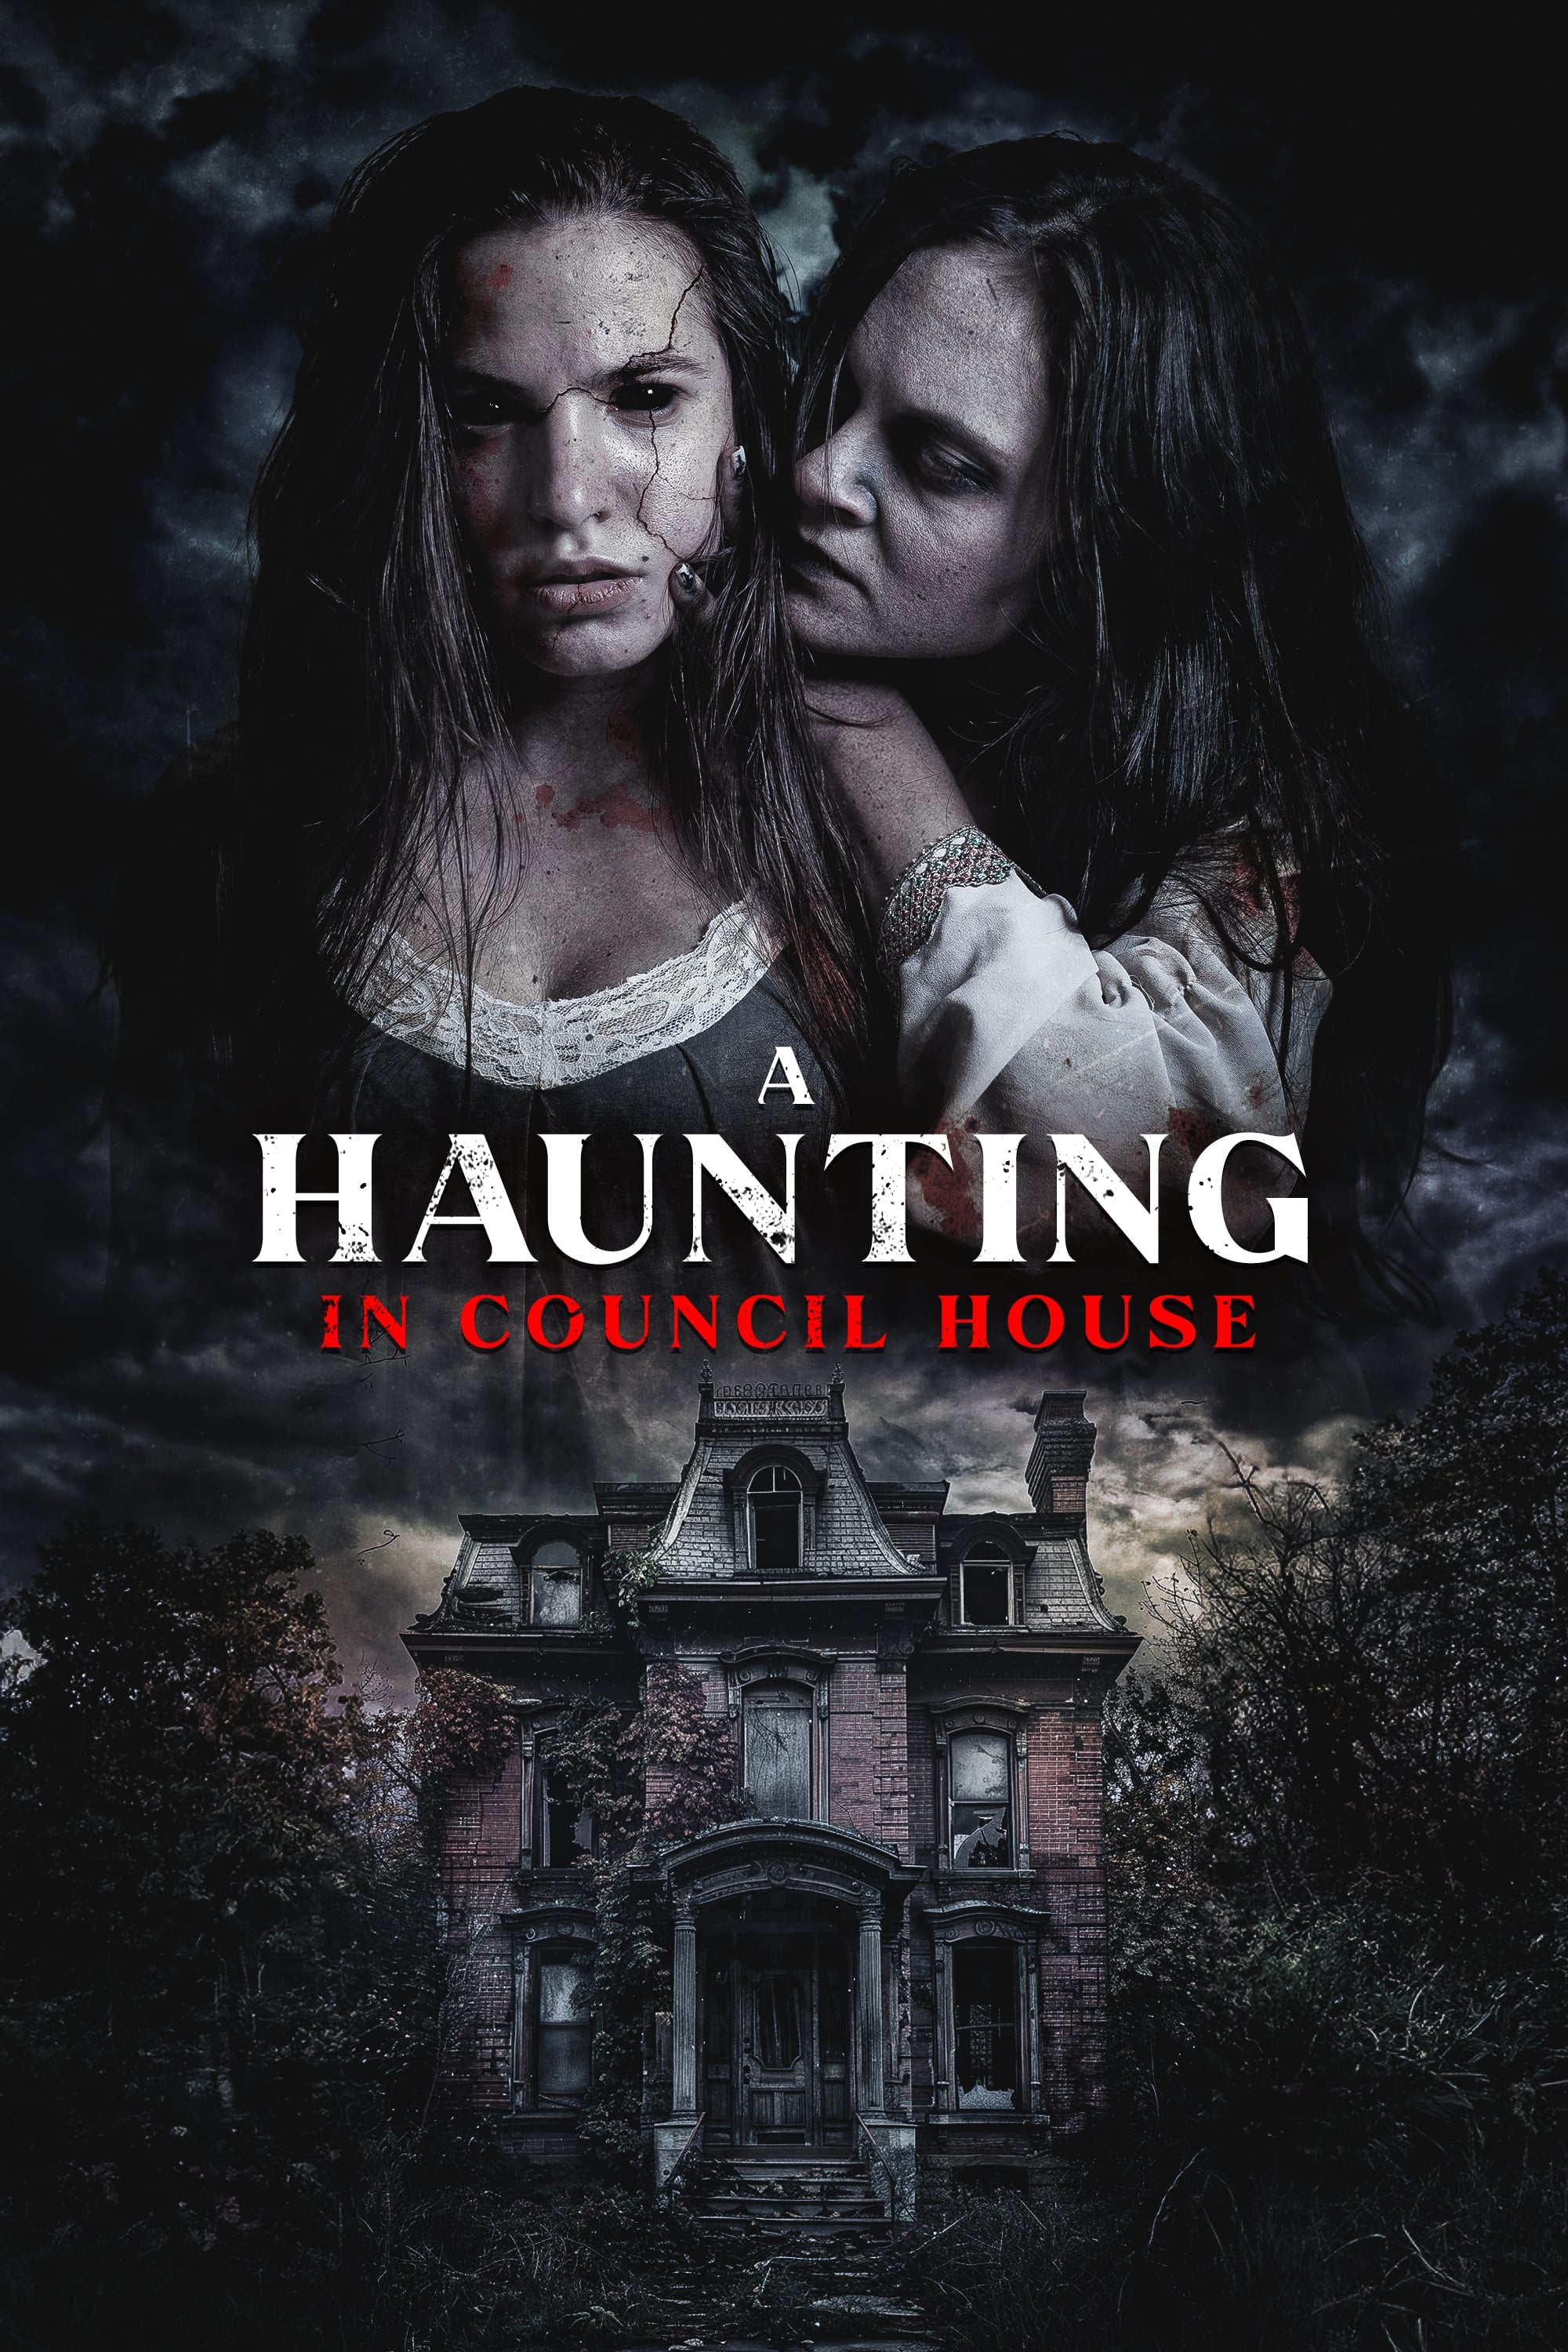 A Haunting in Council House